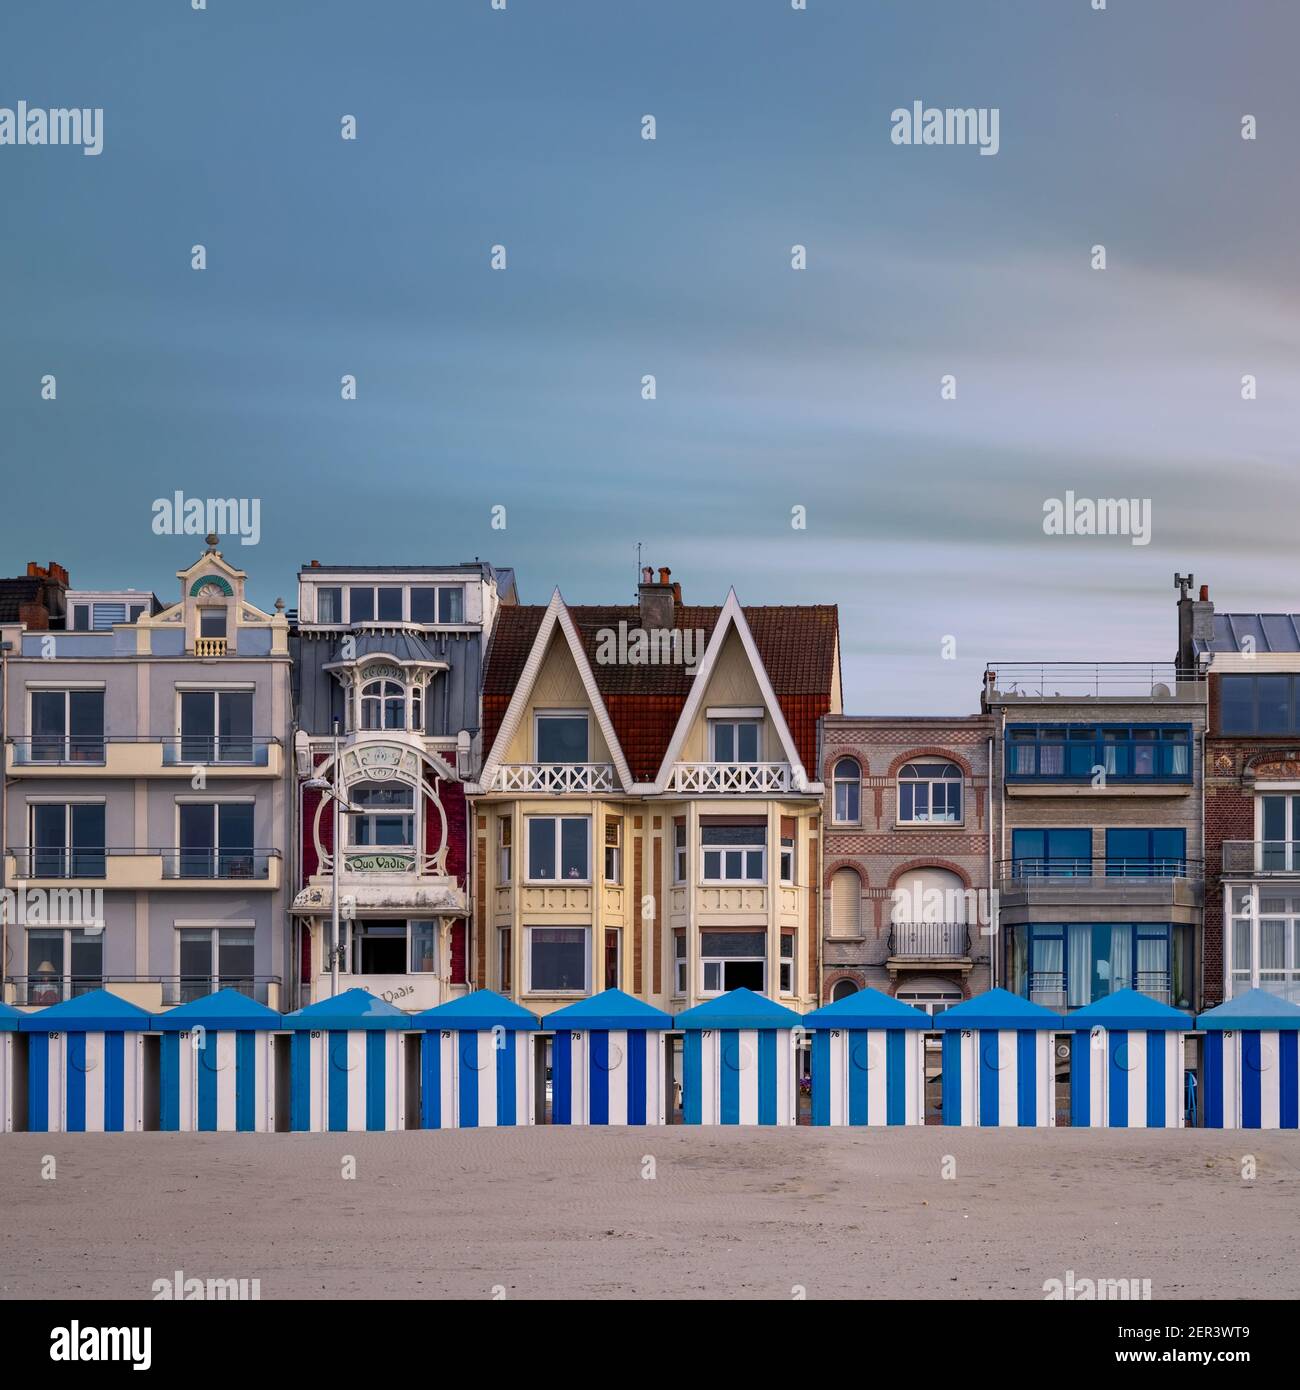 Colorful beach huts in Dunkirk against historic seaside buildings Stock Photo